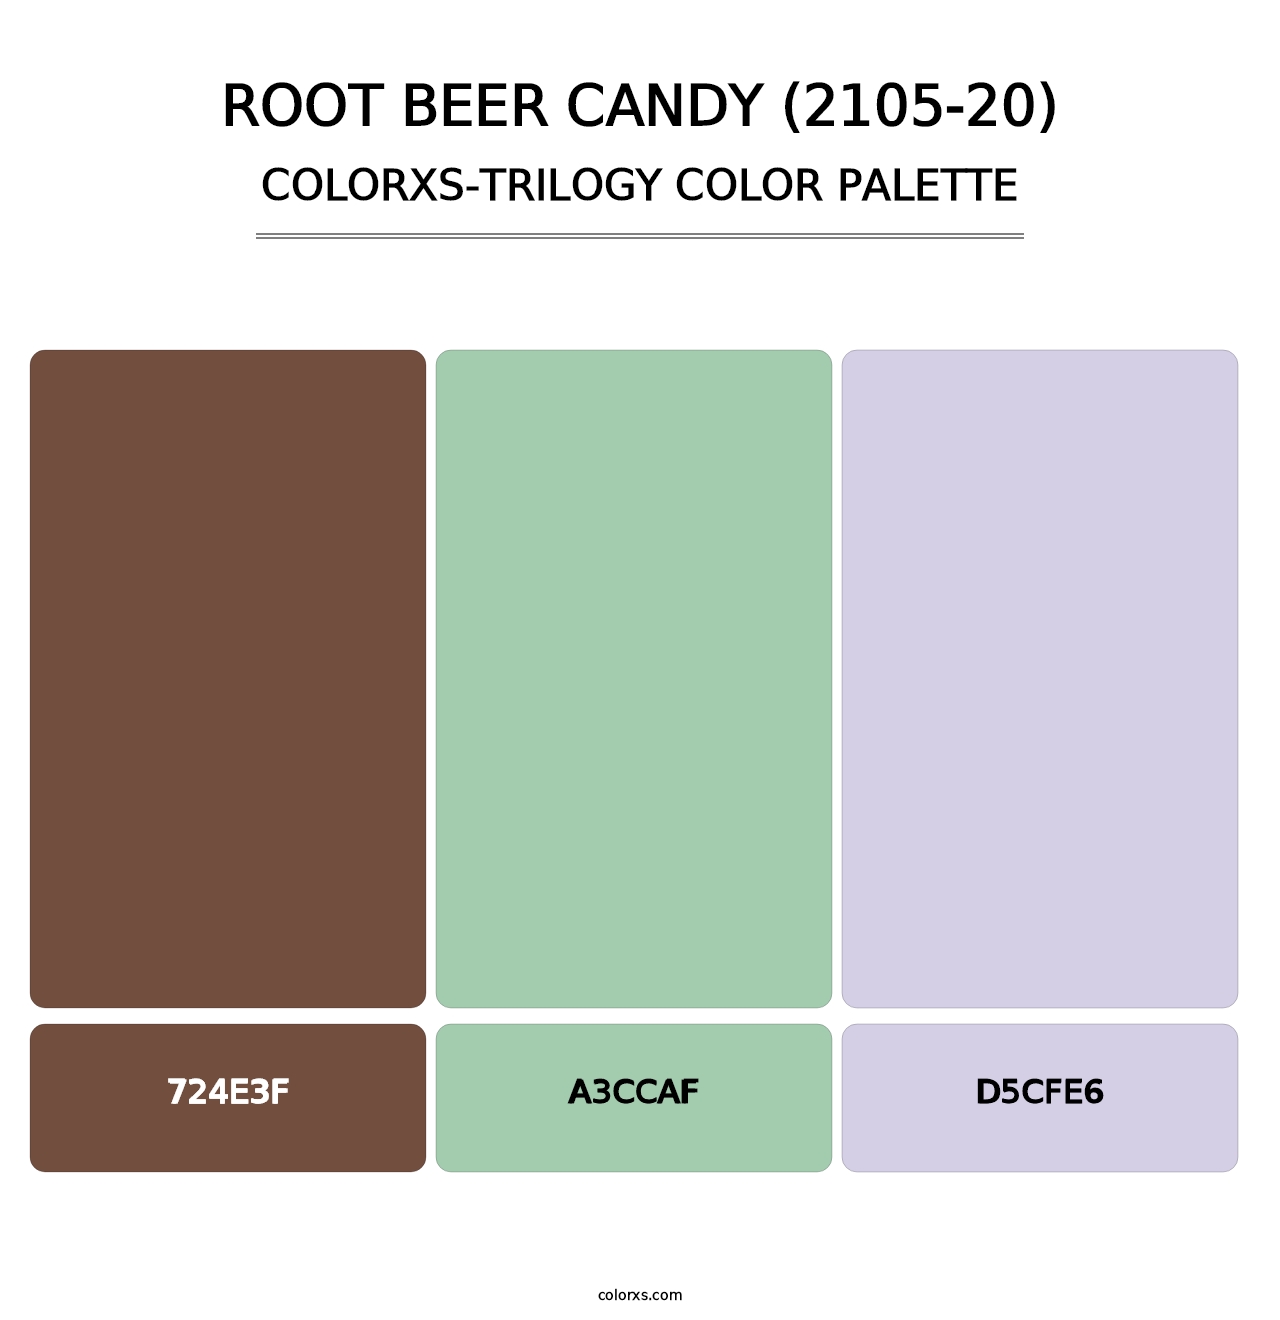 Root Beer Candy (2105-20) - Colorxs Trilogy Palette